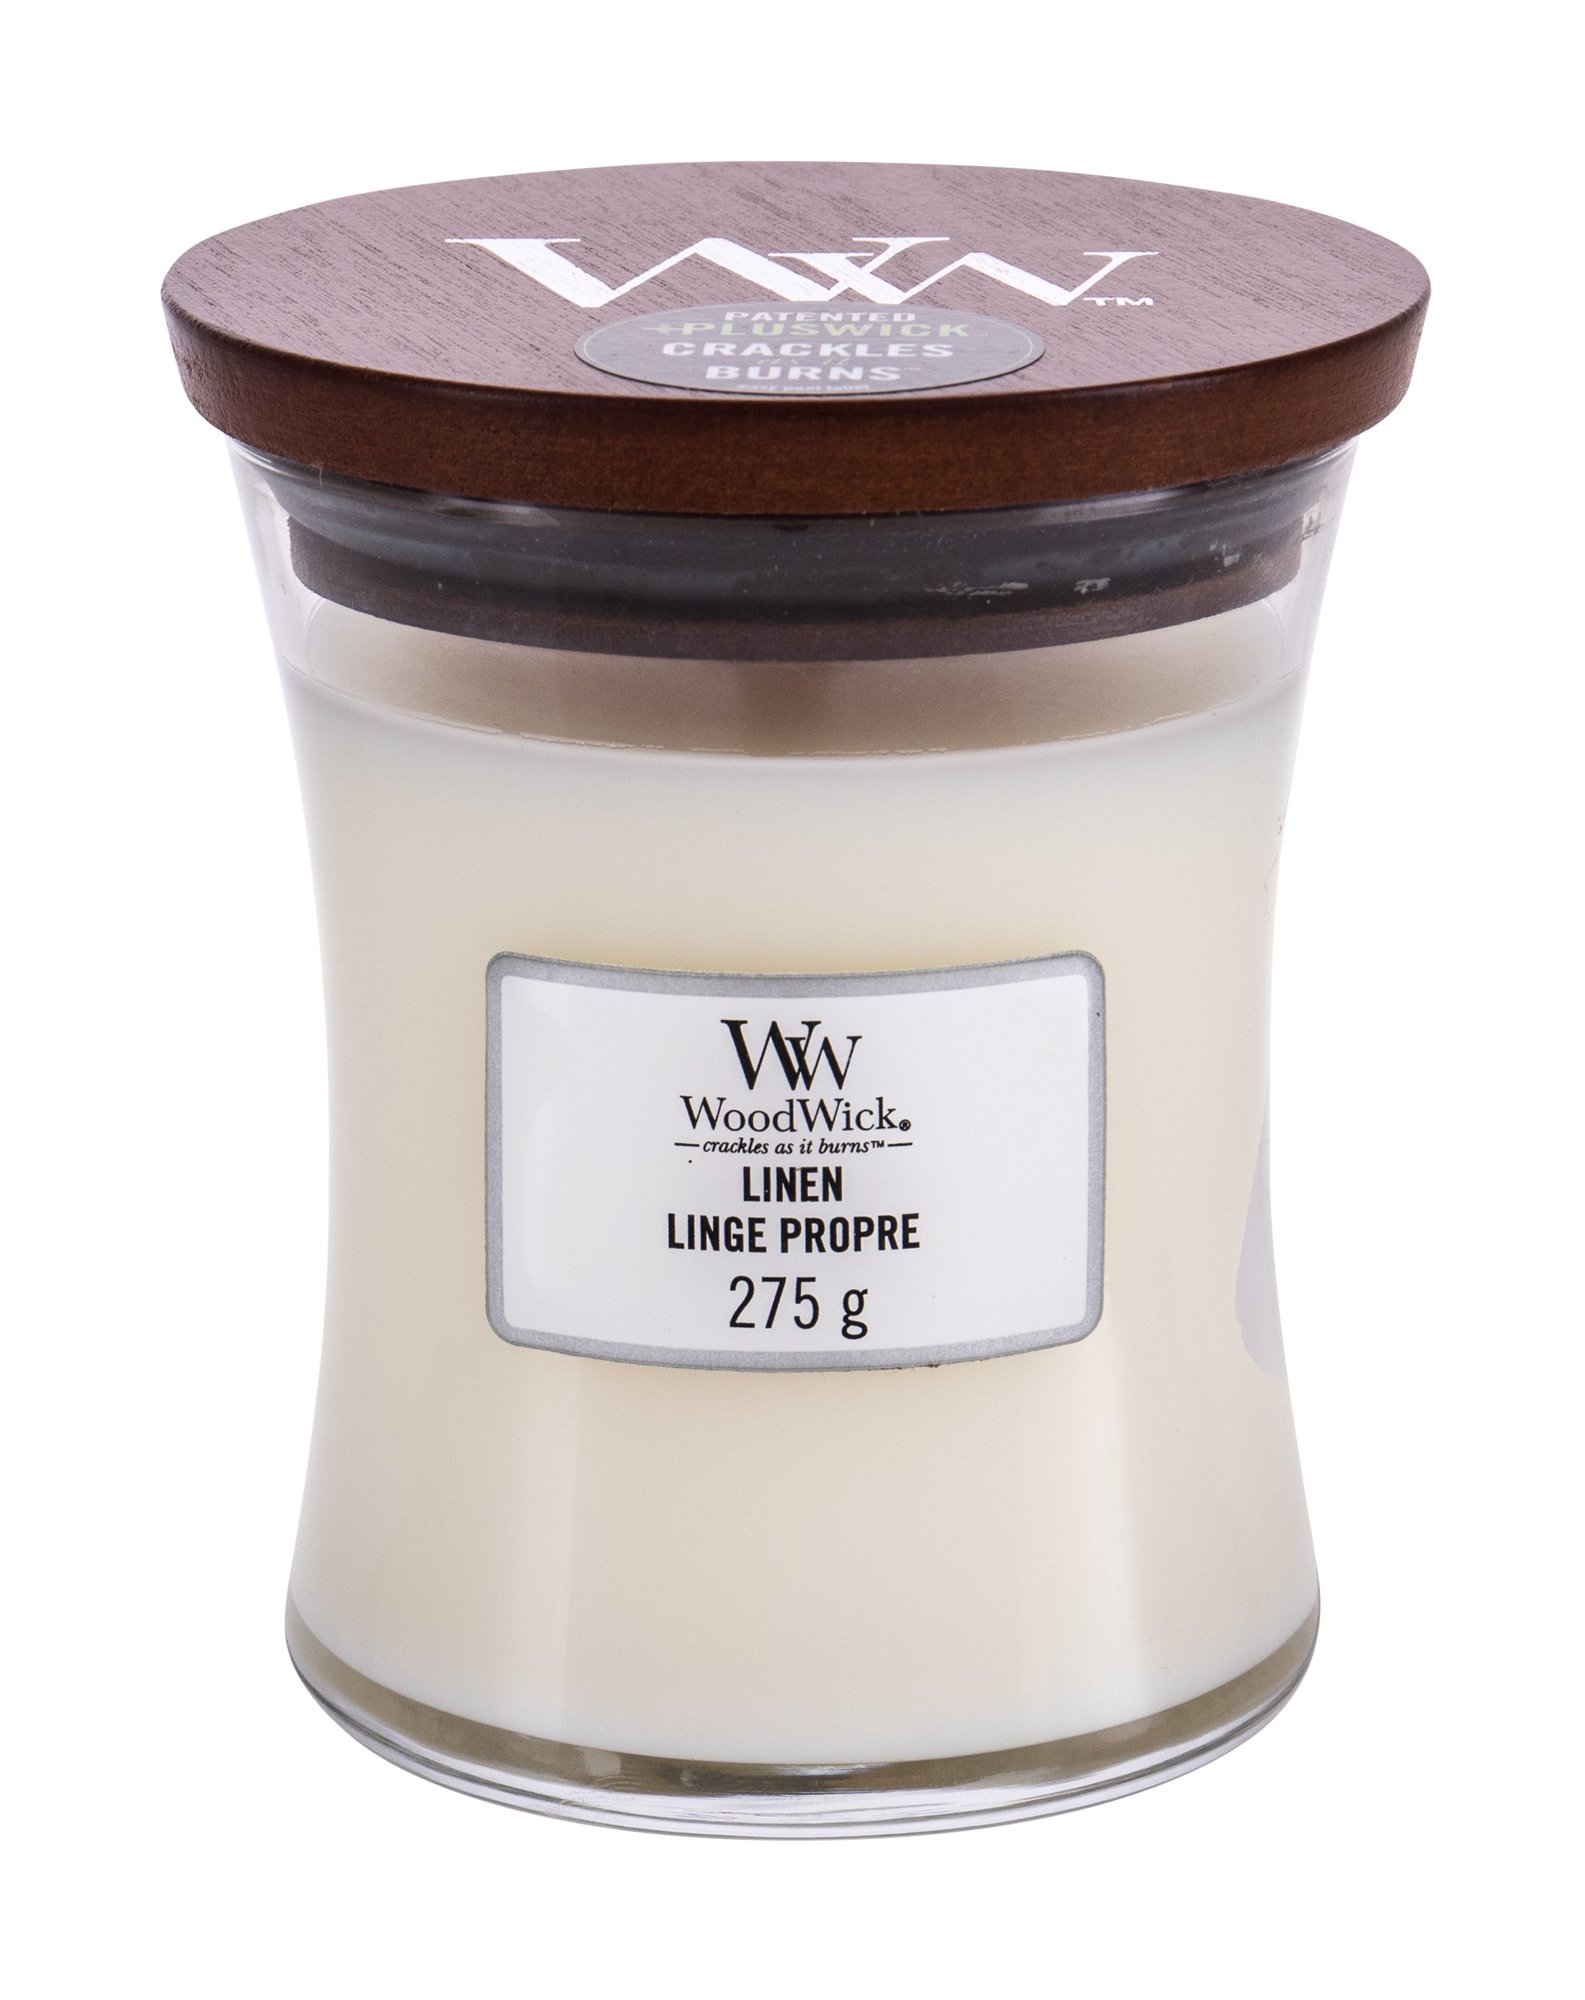 WoodWick Linen 275g Kvepalai Unisex Scented Candle